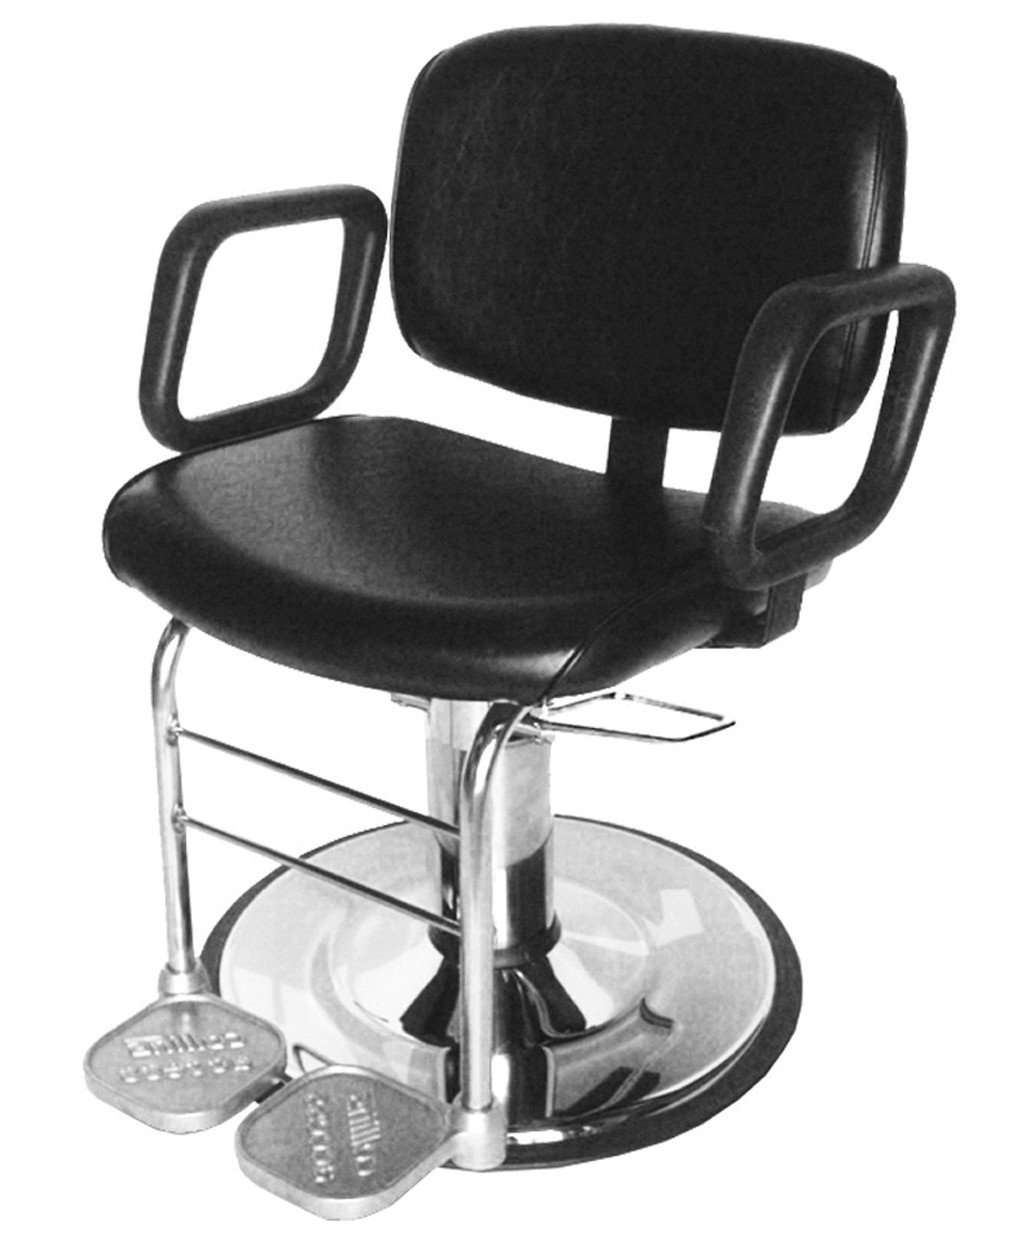 Collins 7700 Access Styling Chair